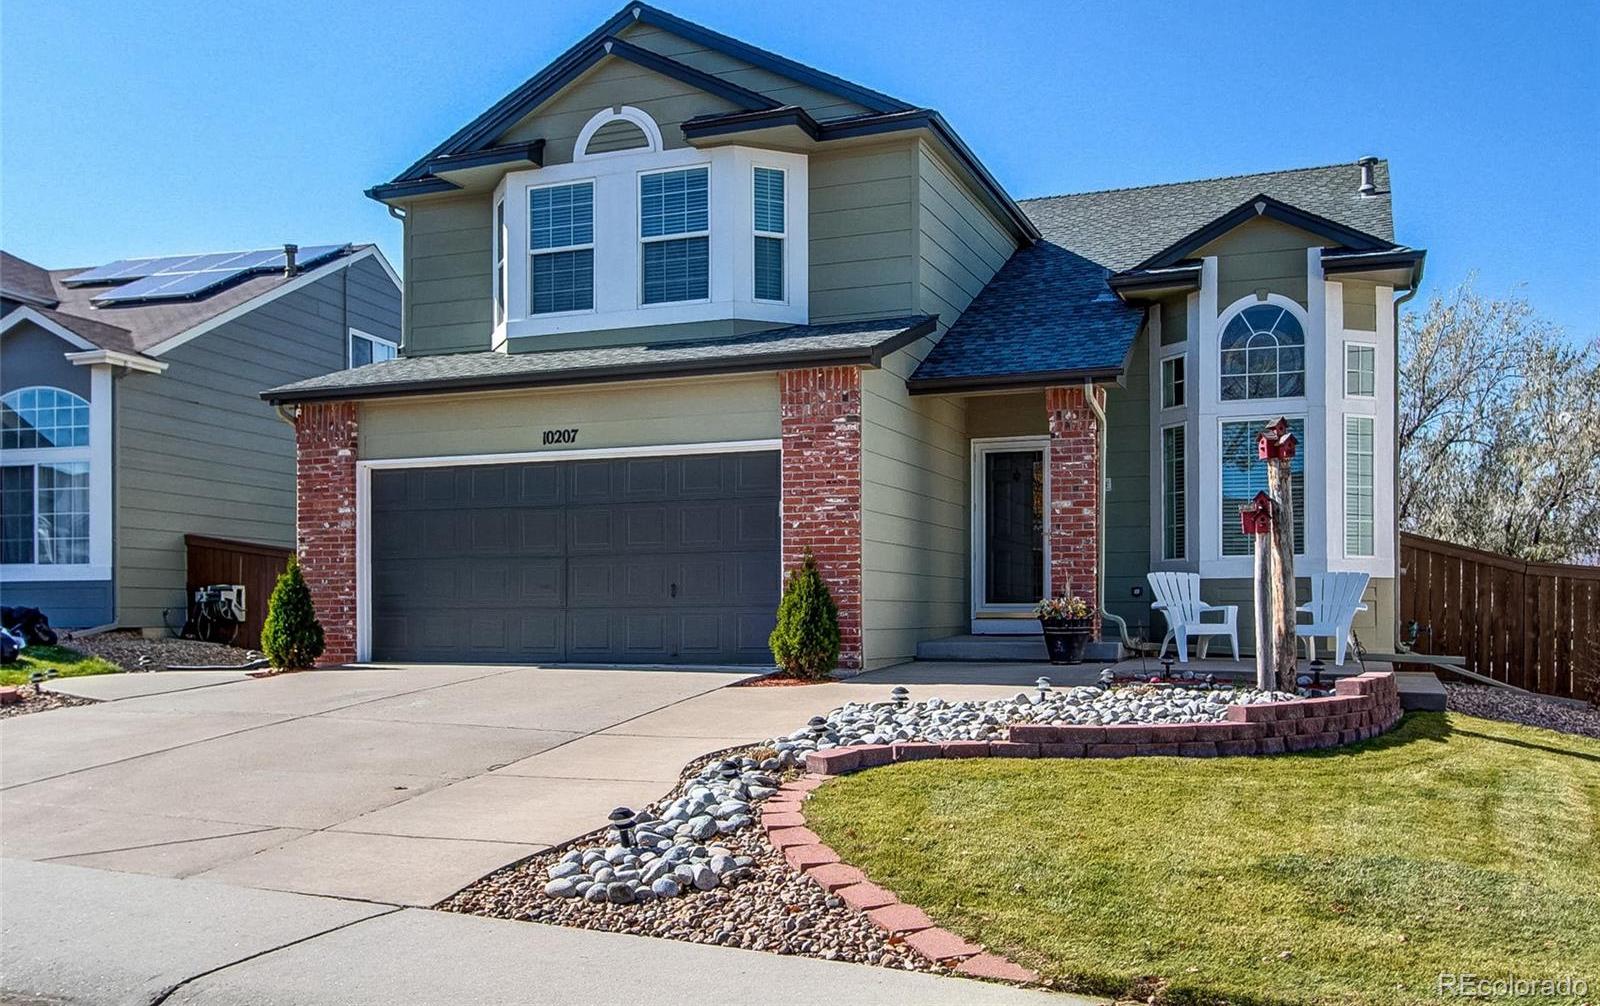 Photo one of 10207 Woodrose Ln Highlands Ranch CO 80129 | MLS 4495880